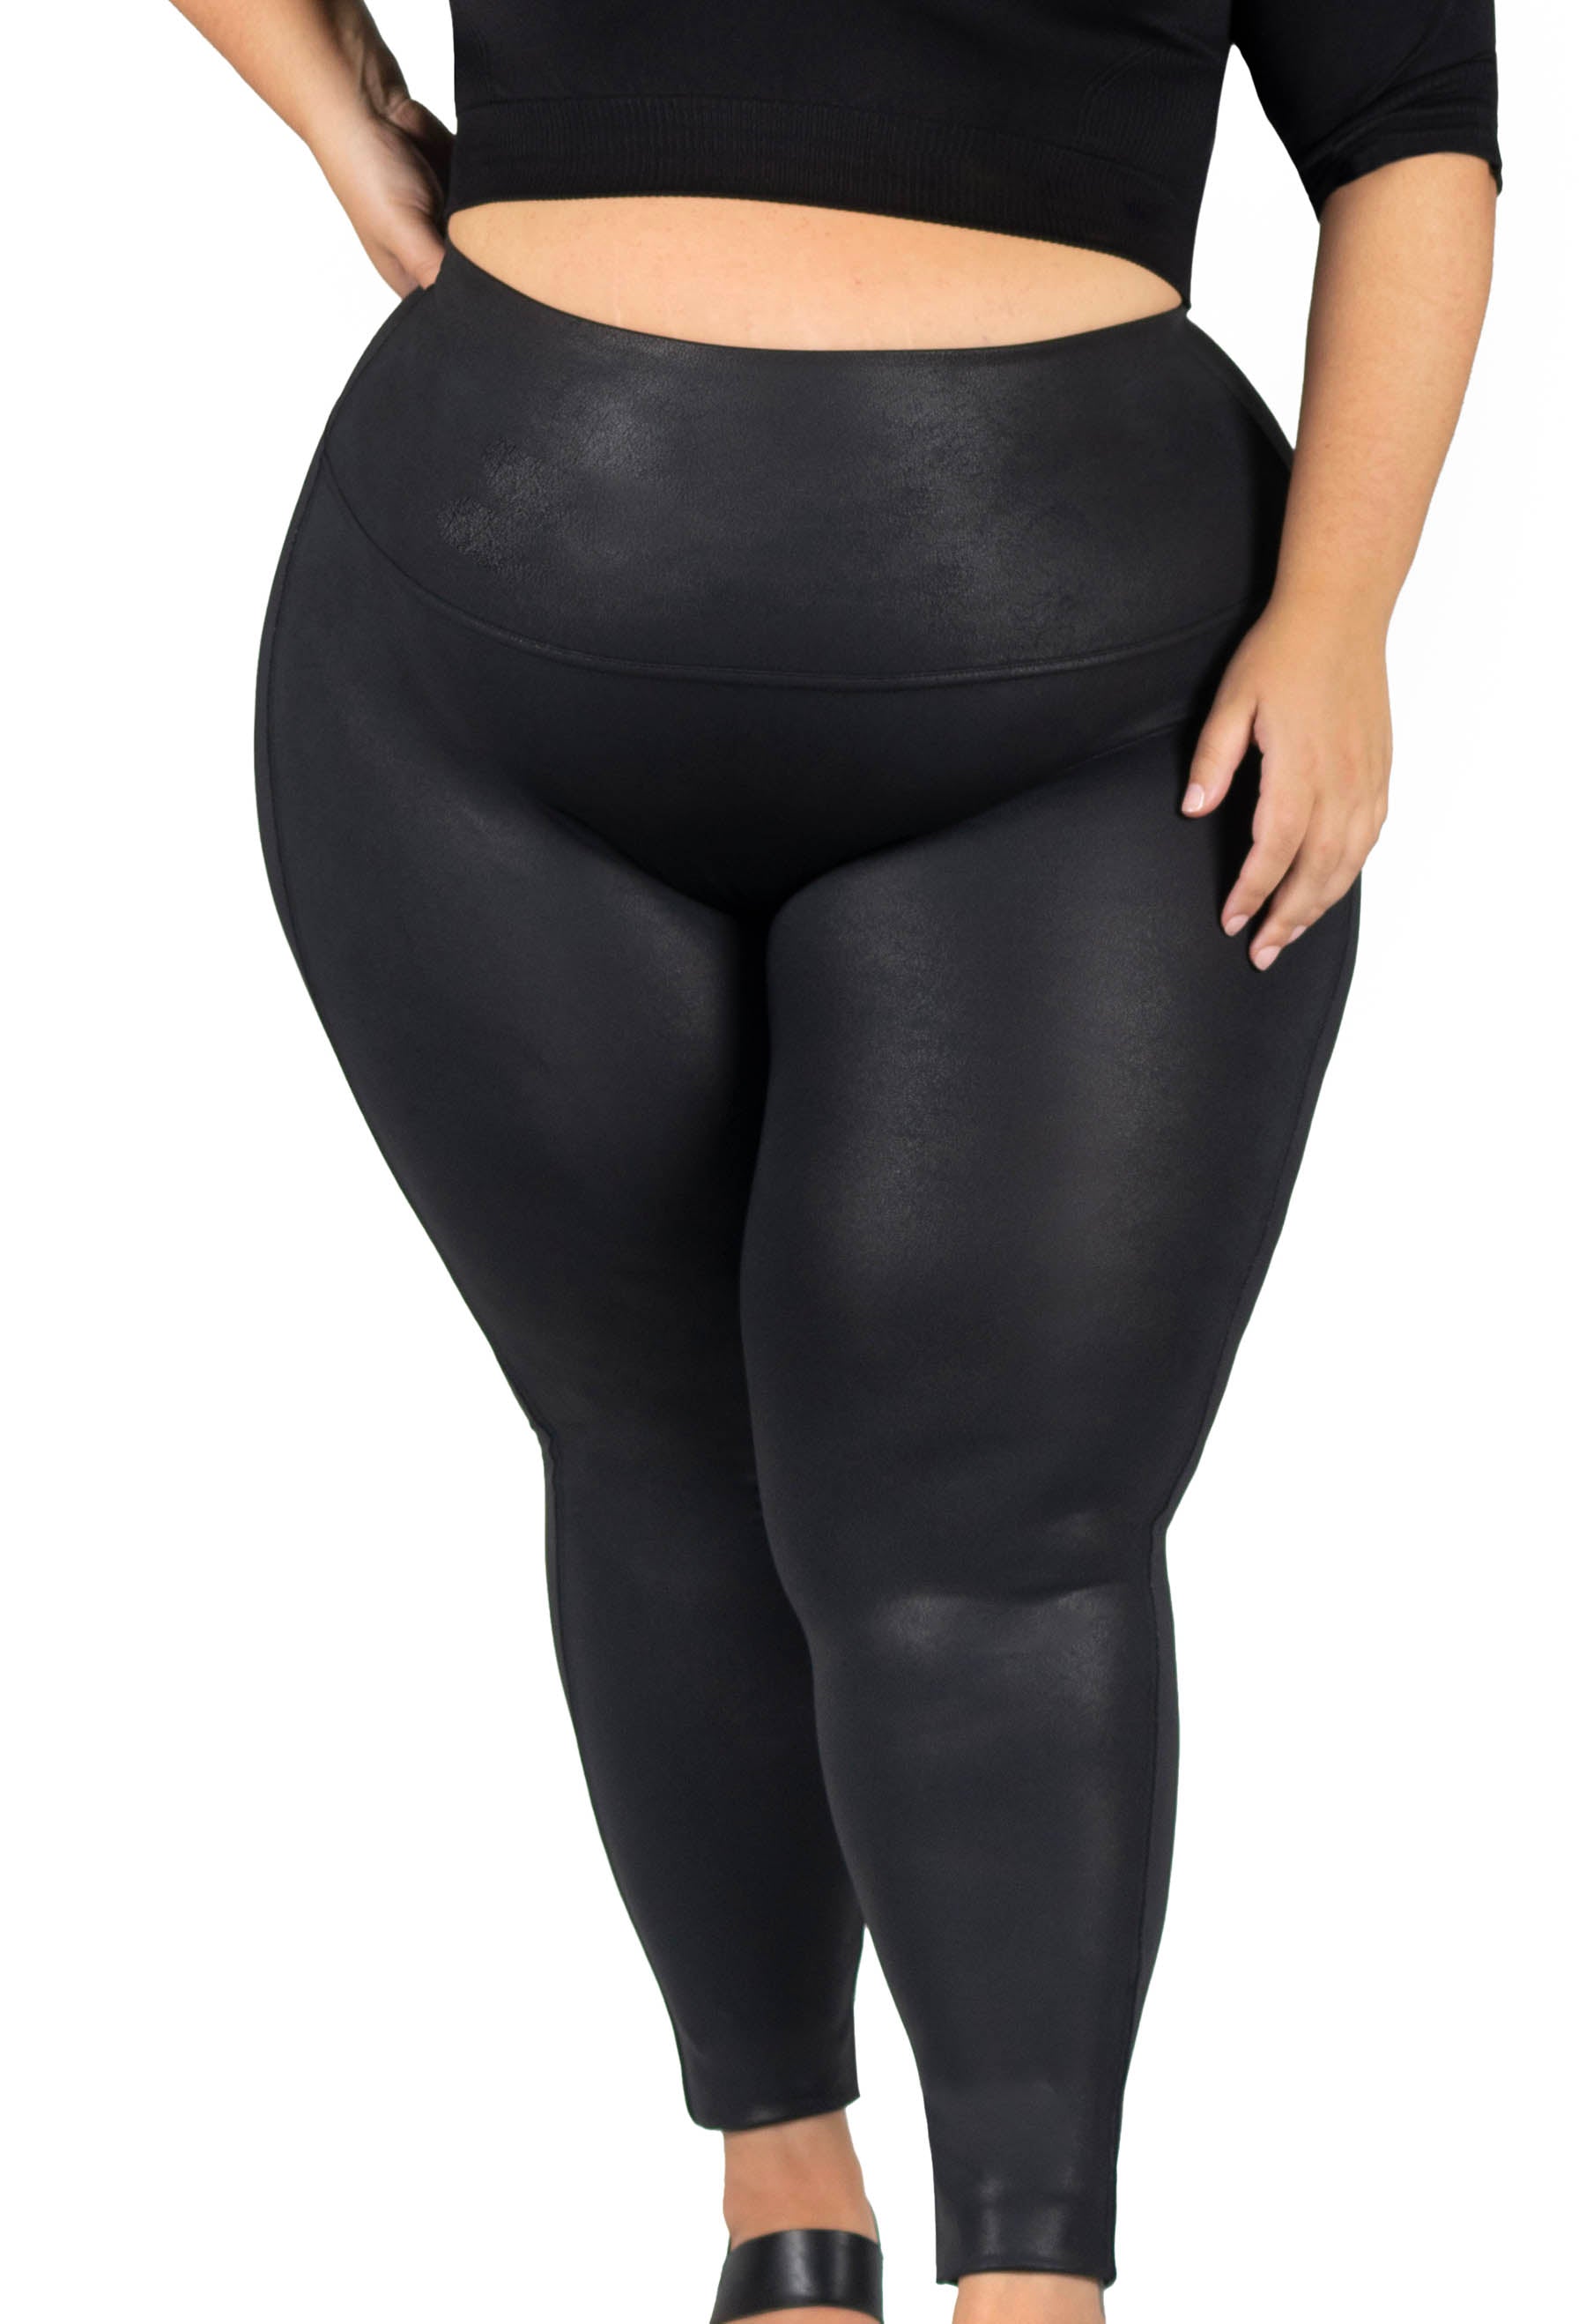 SHEIN BASICS Women'S Casual Solid Color Leggings for Sale Australia| New  Collection Online| SHEIN Australia